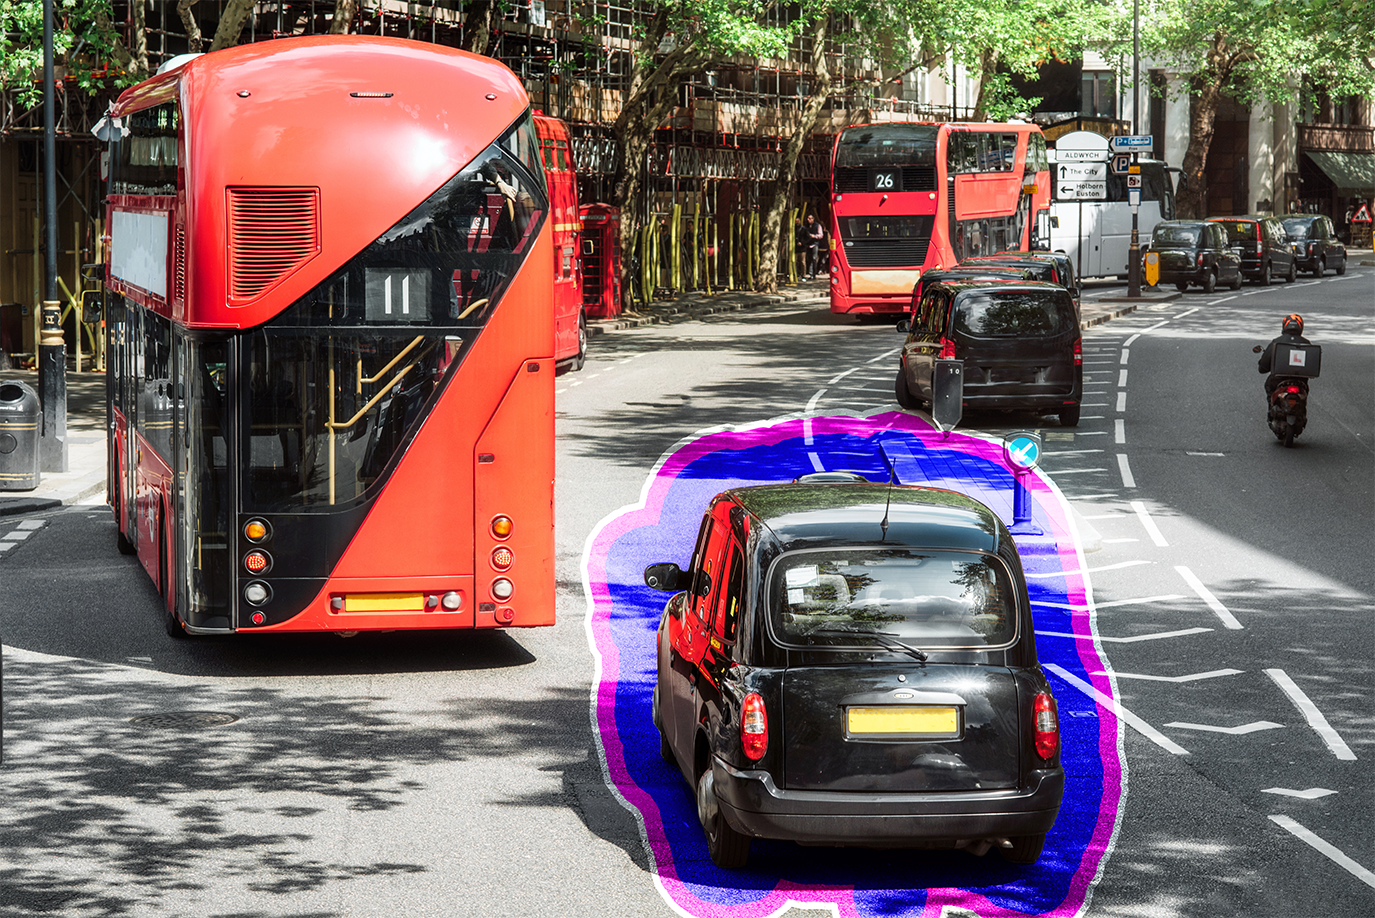 (Neural Mechanisms & Spatial Mapping) An aura to symbolise neural waves surrounds a London cab as it navigates the busy streets.